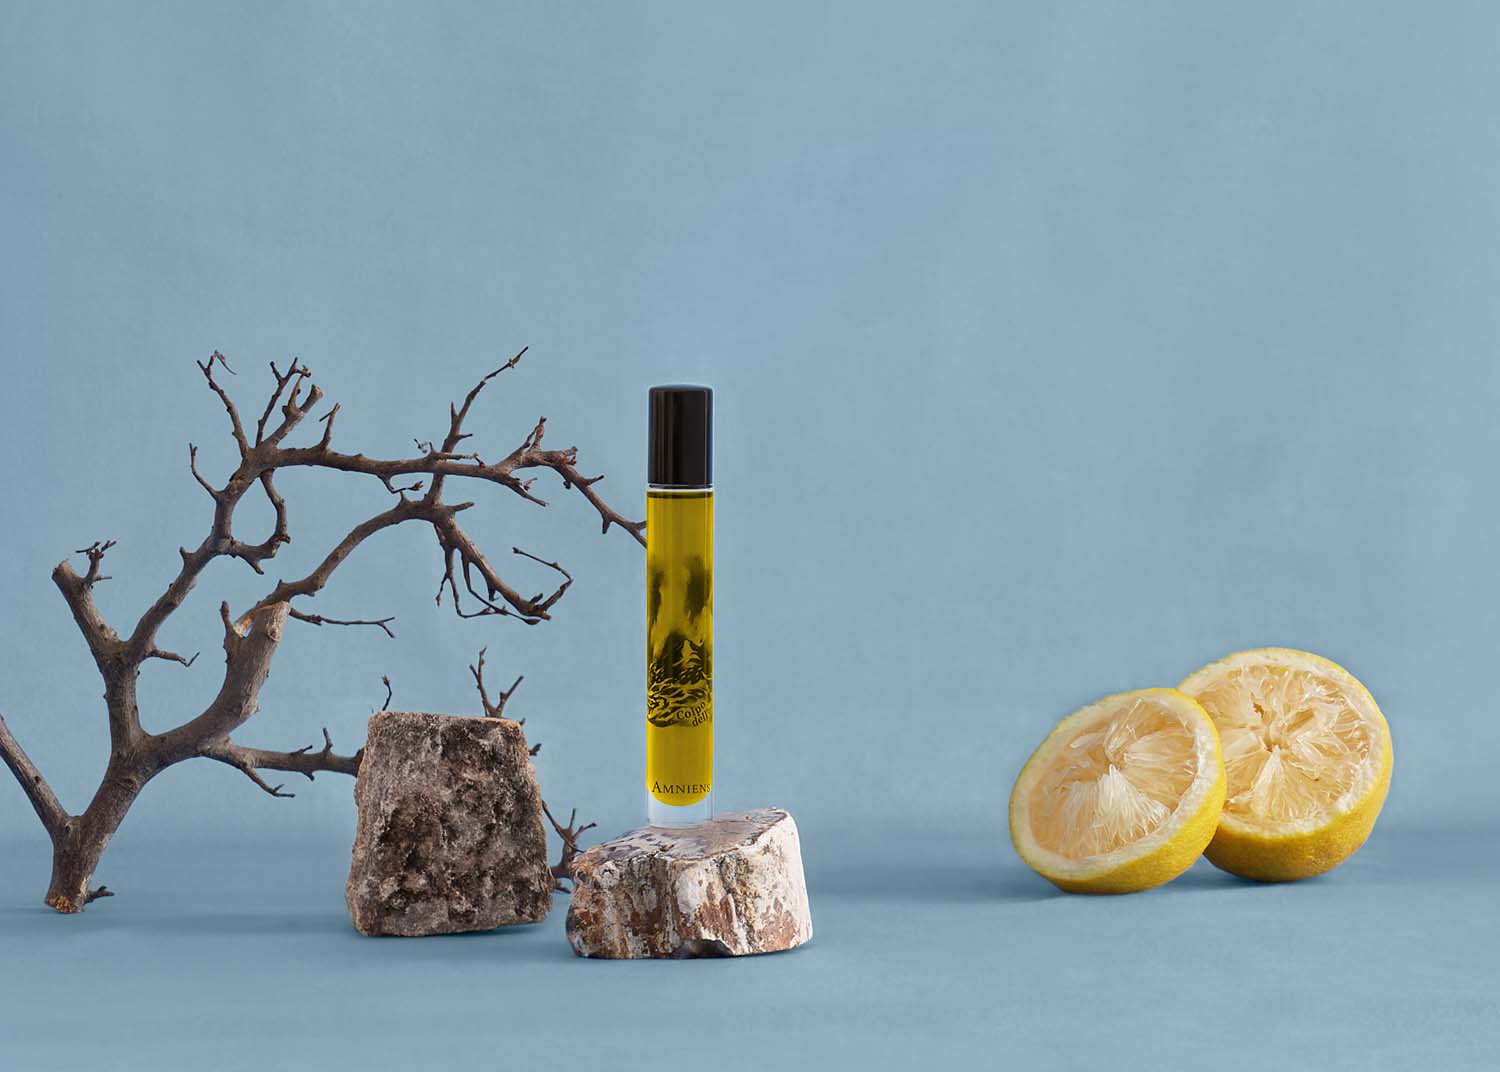 Colpo dell'onda scented oil for a moment of energy featured in a scene with lemons, rocks, and branches.